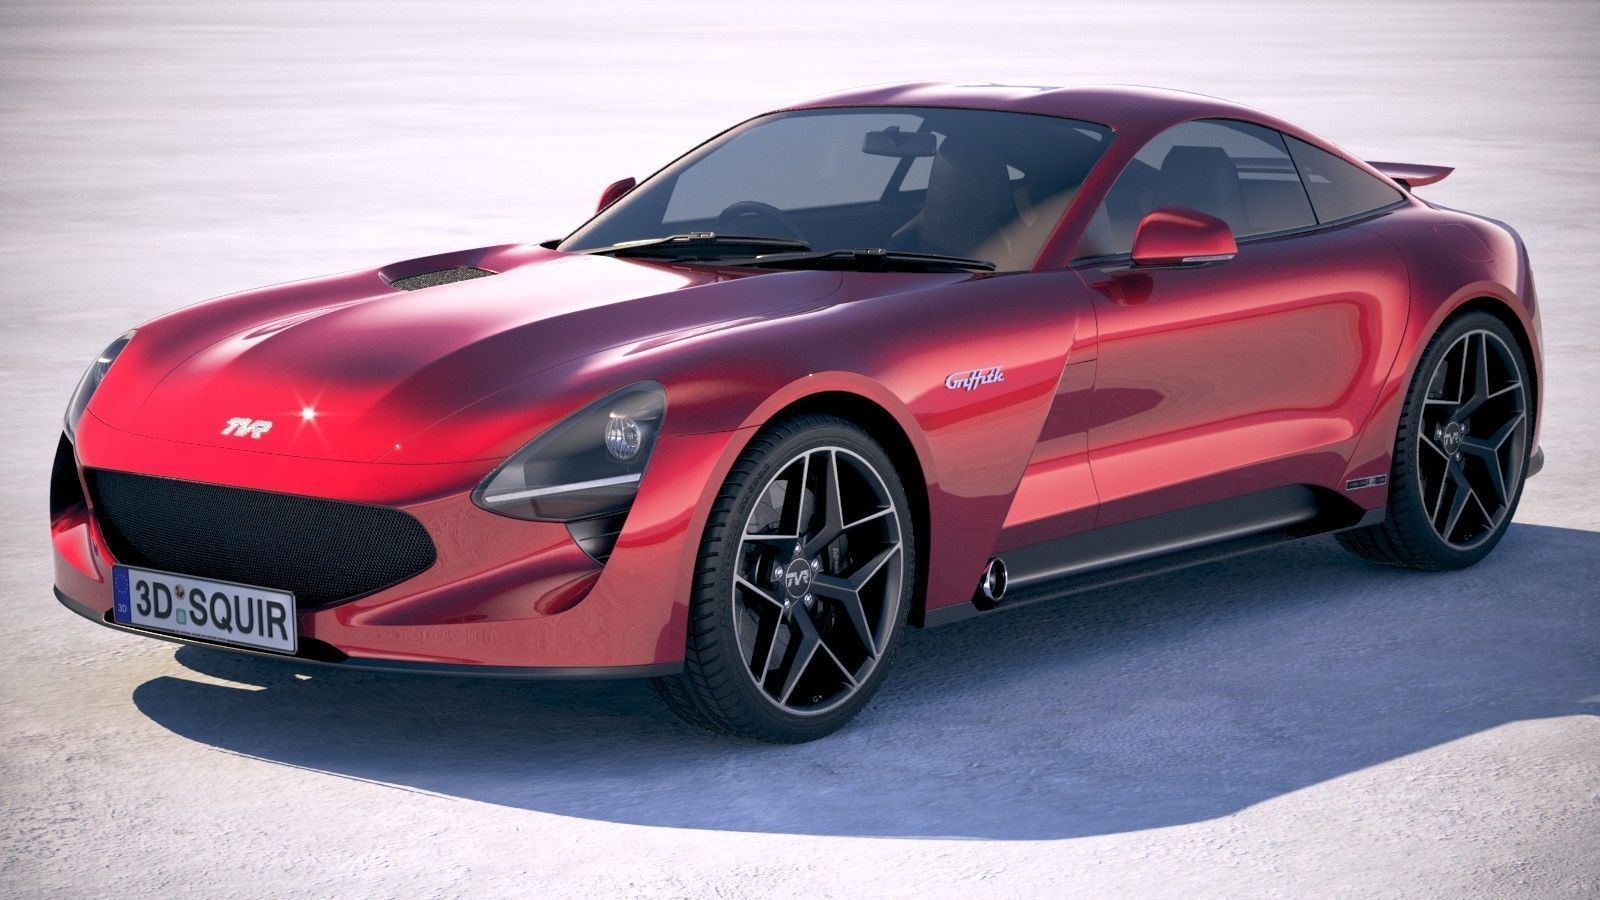 2018 TVR Griffith